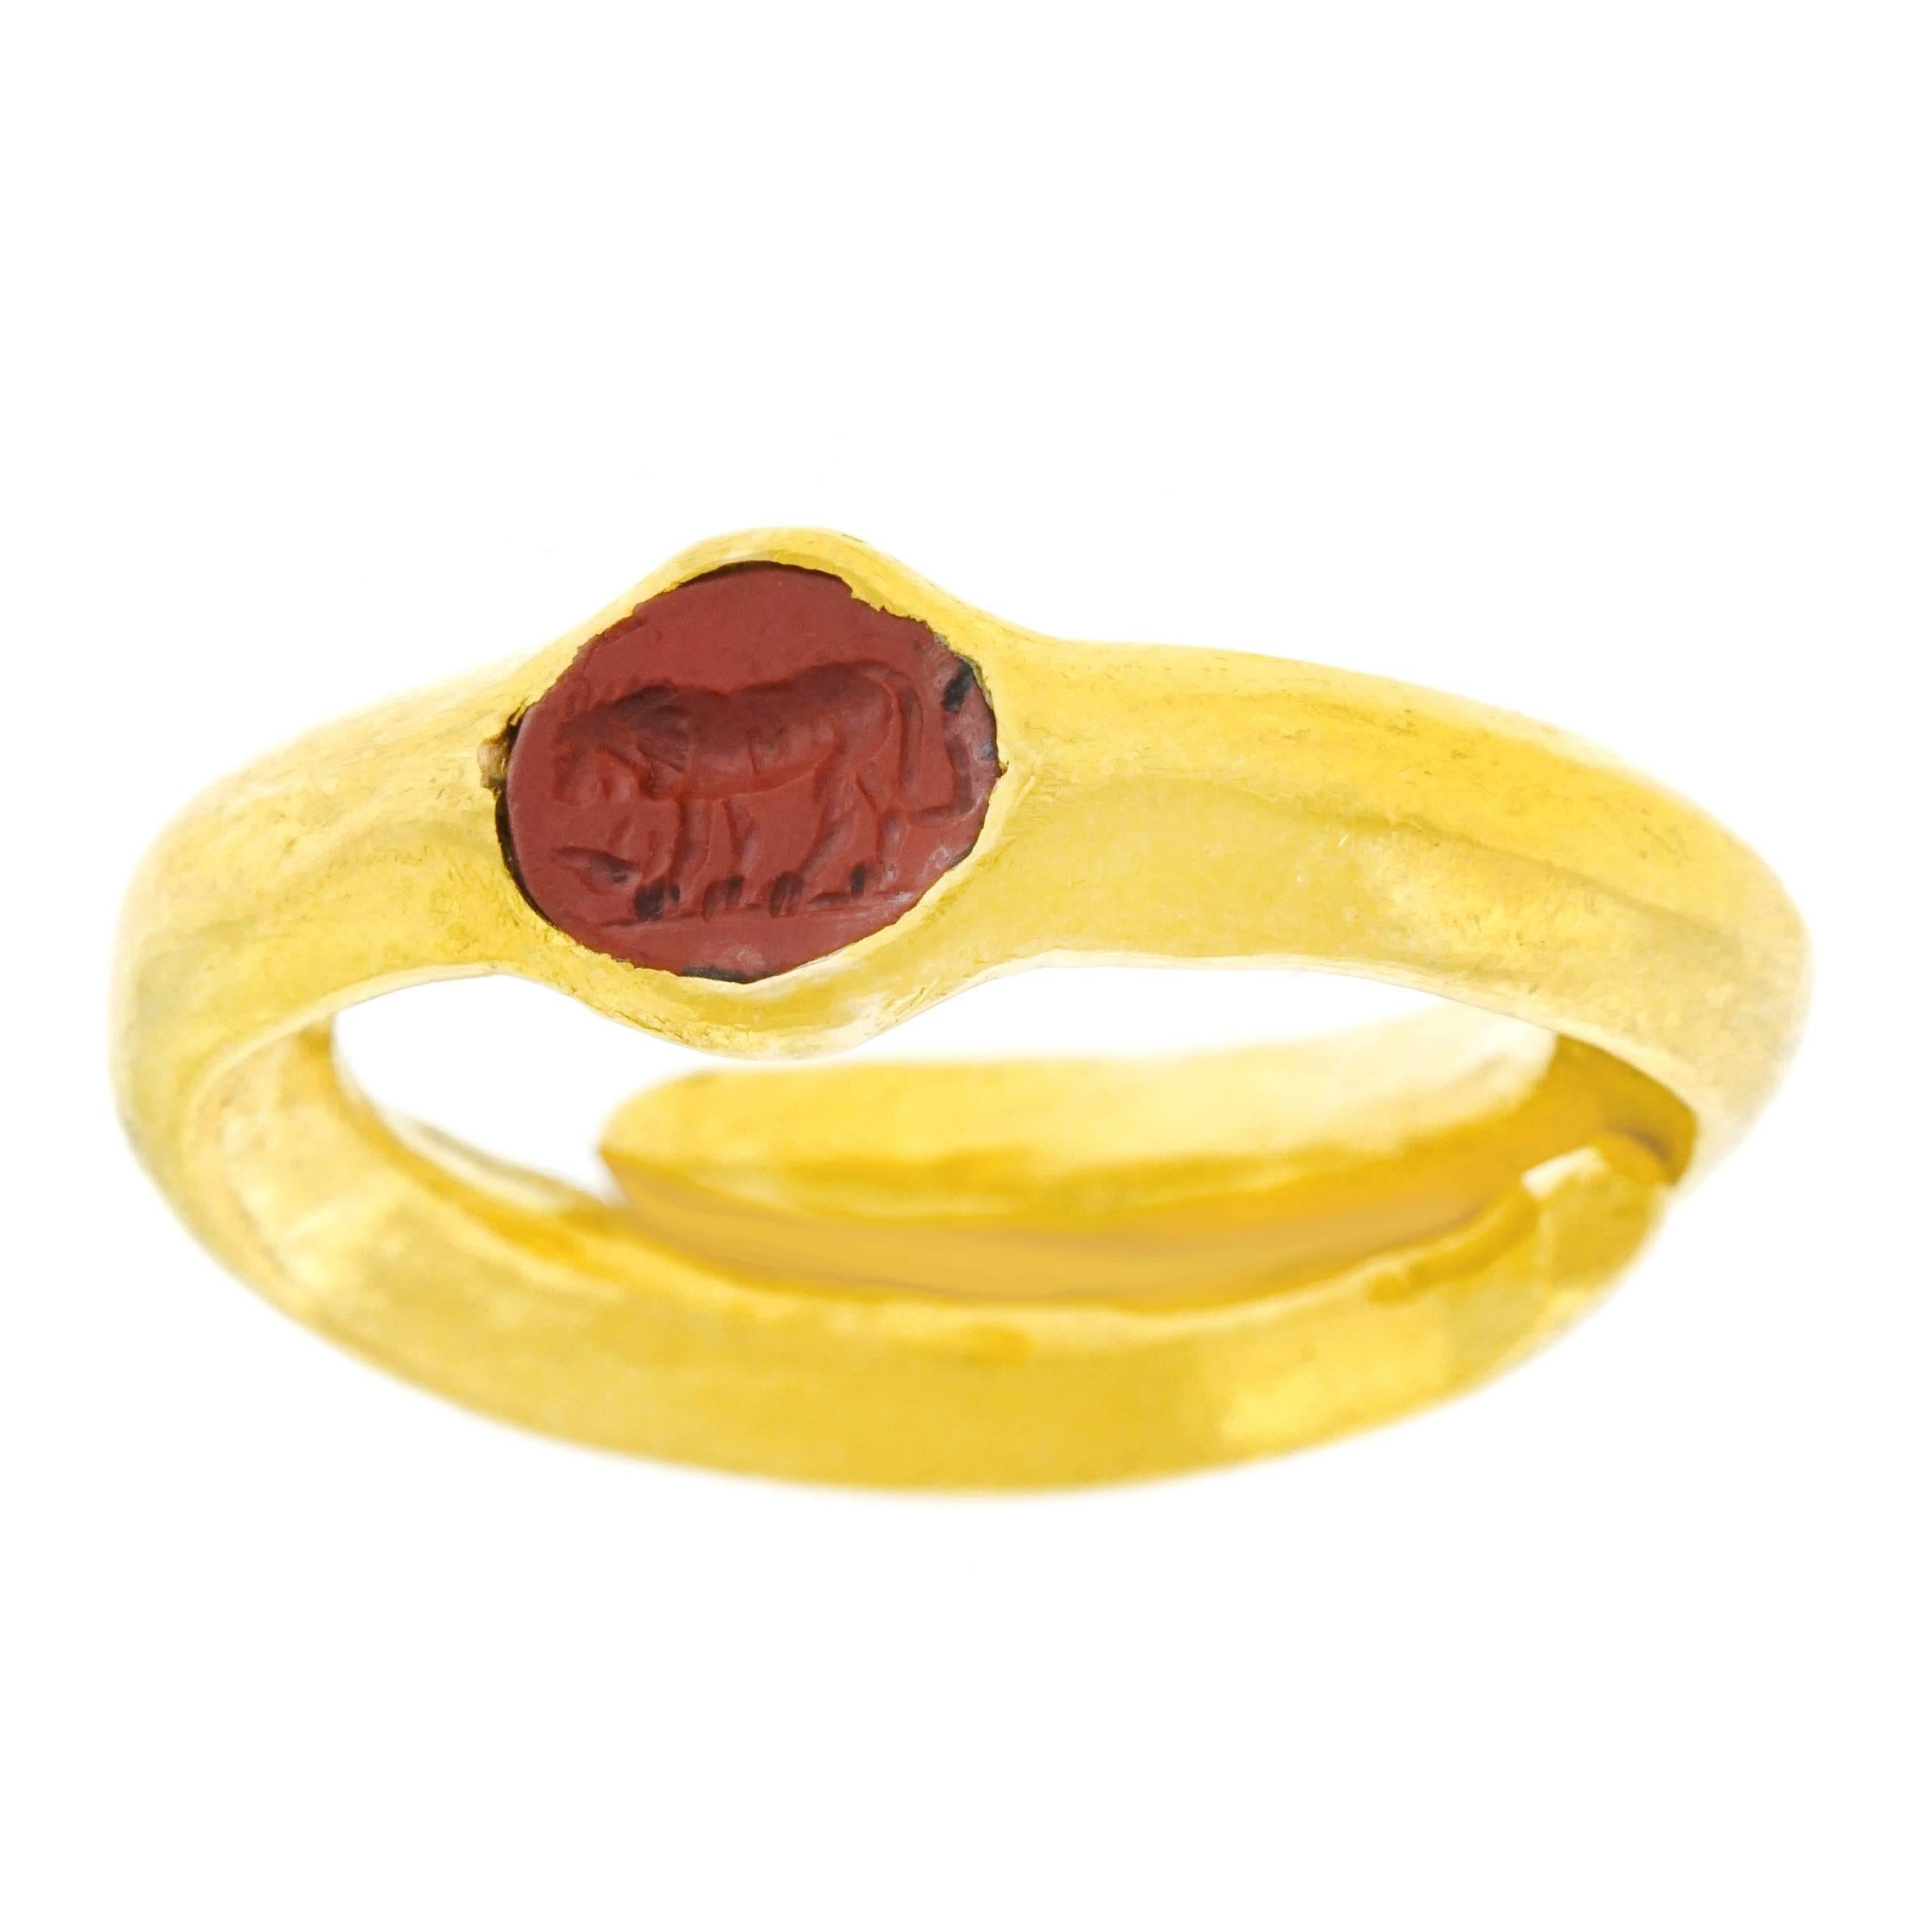 Classical Intaglio High Karat Ring in the Ancient Style